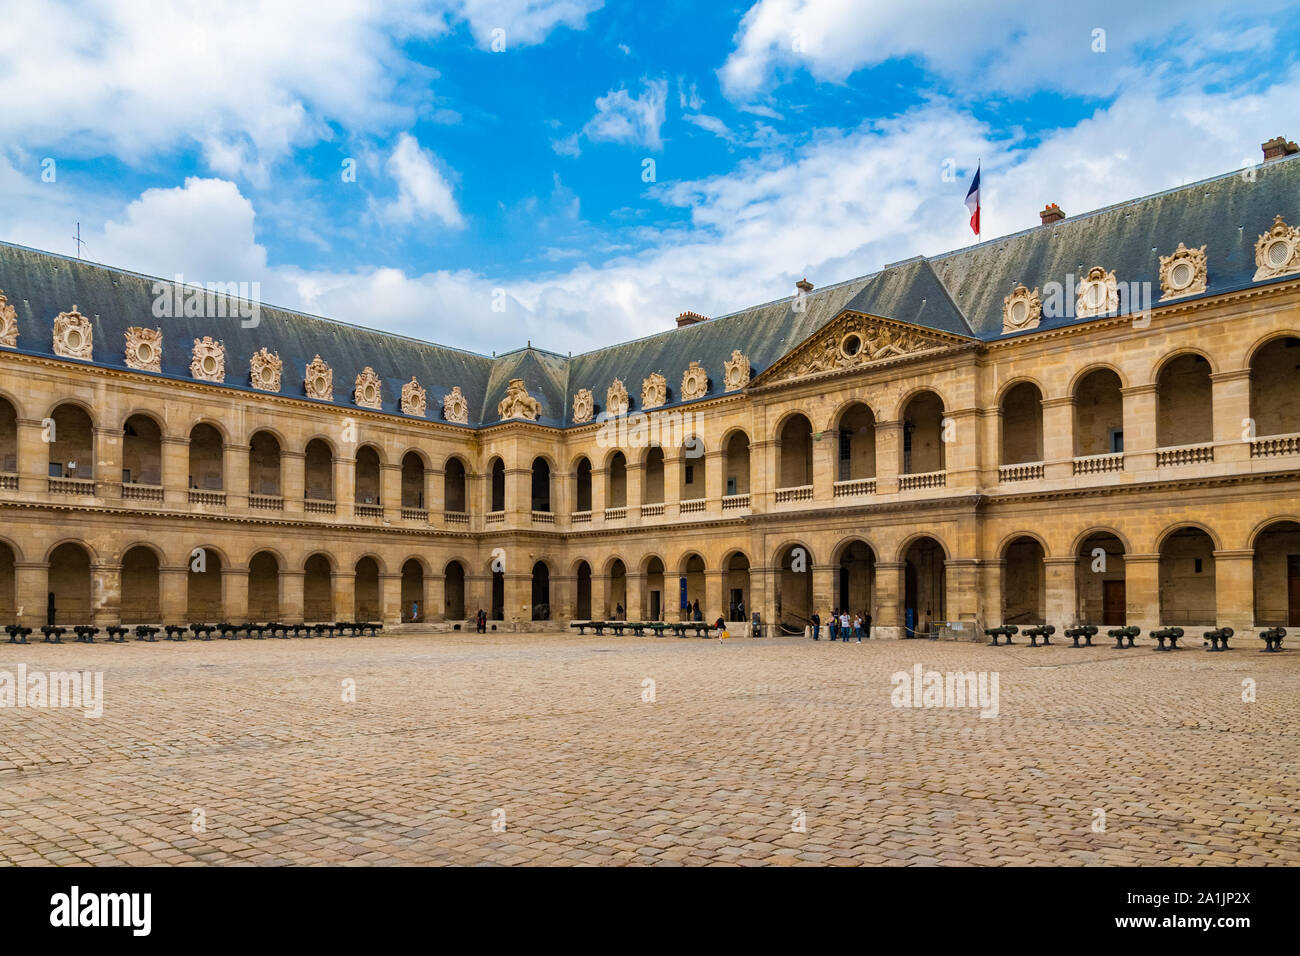 Panoramic view inside the cour d'honneur (court of honour) with rows of historic cannons. Built for military parades, it is the largest courtyard of... Stock Photo